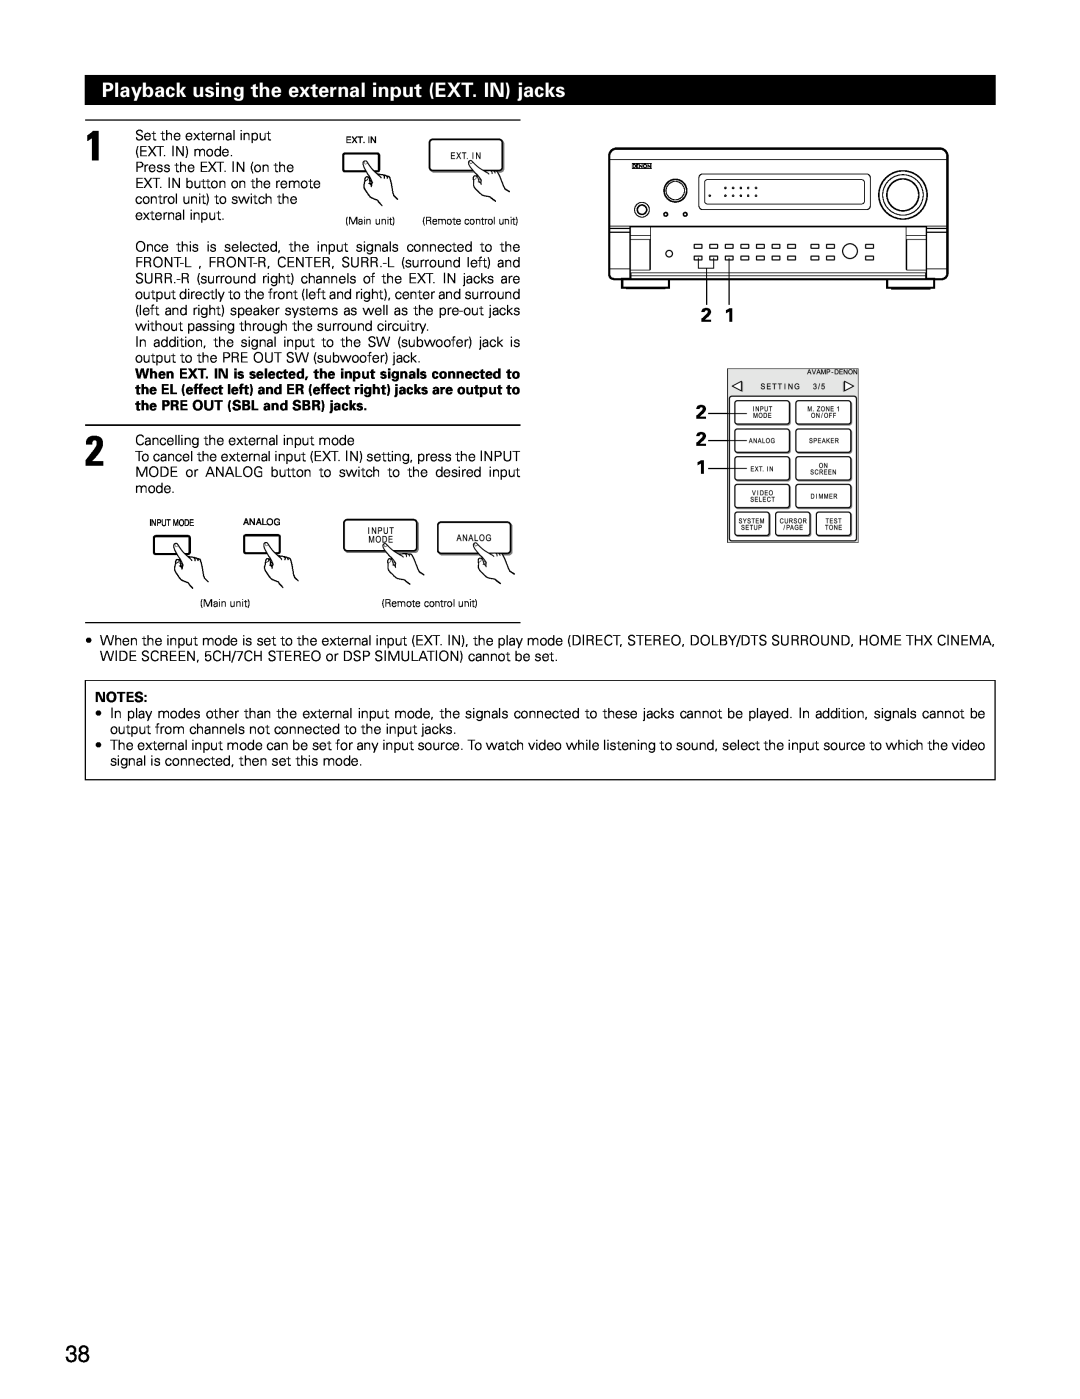 Denon AVR-4802 manual Playback using the external input EXT. IN jacks, Notes 